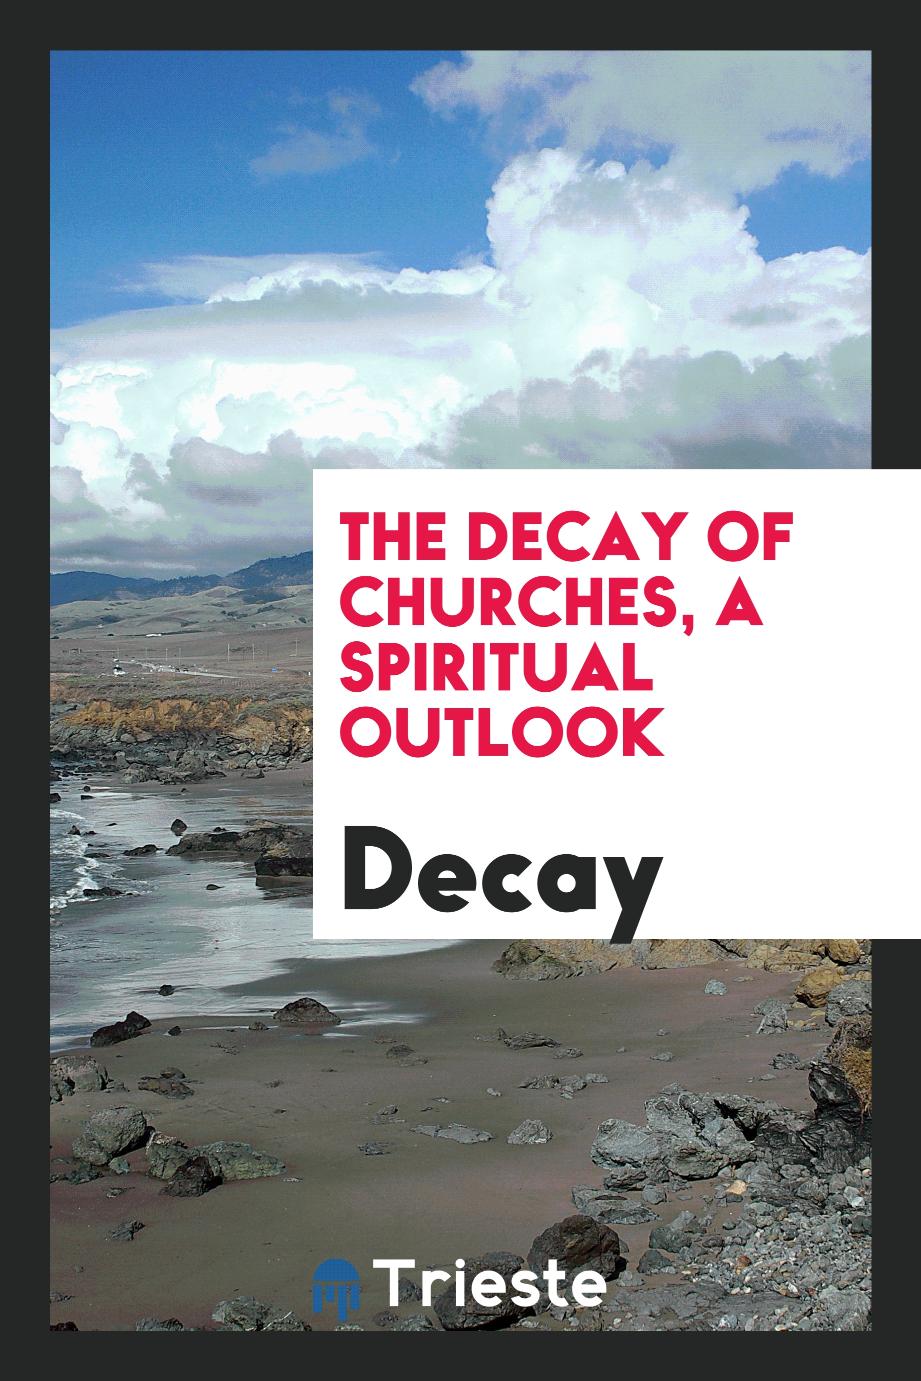 The Decay of Churches, a Spiritual Outlook